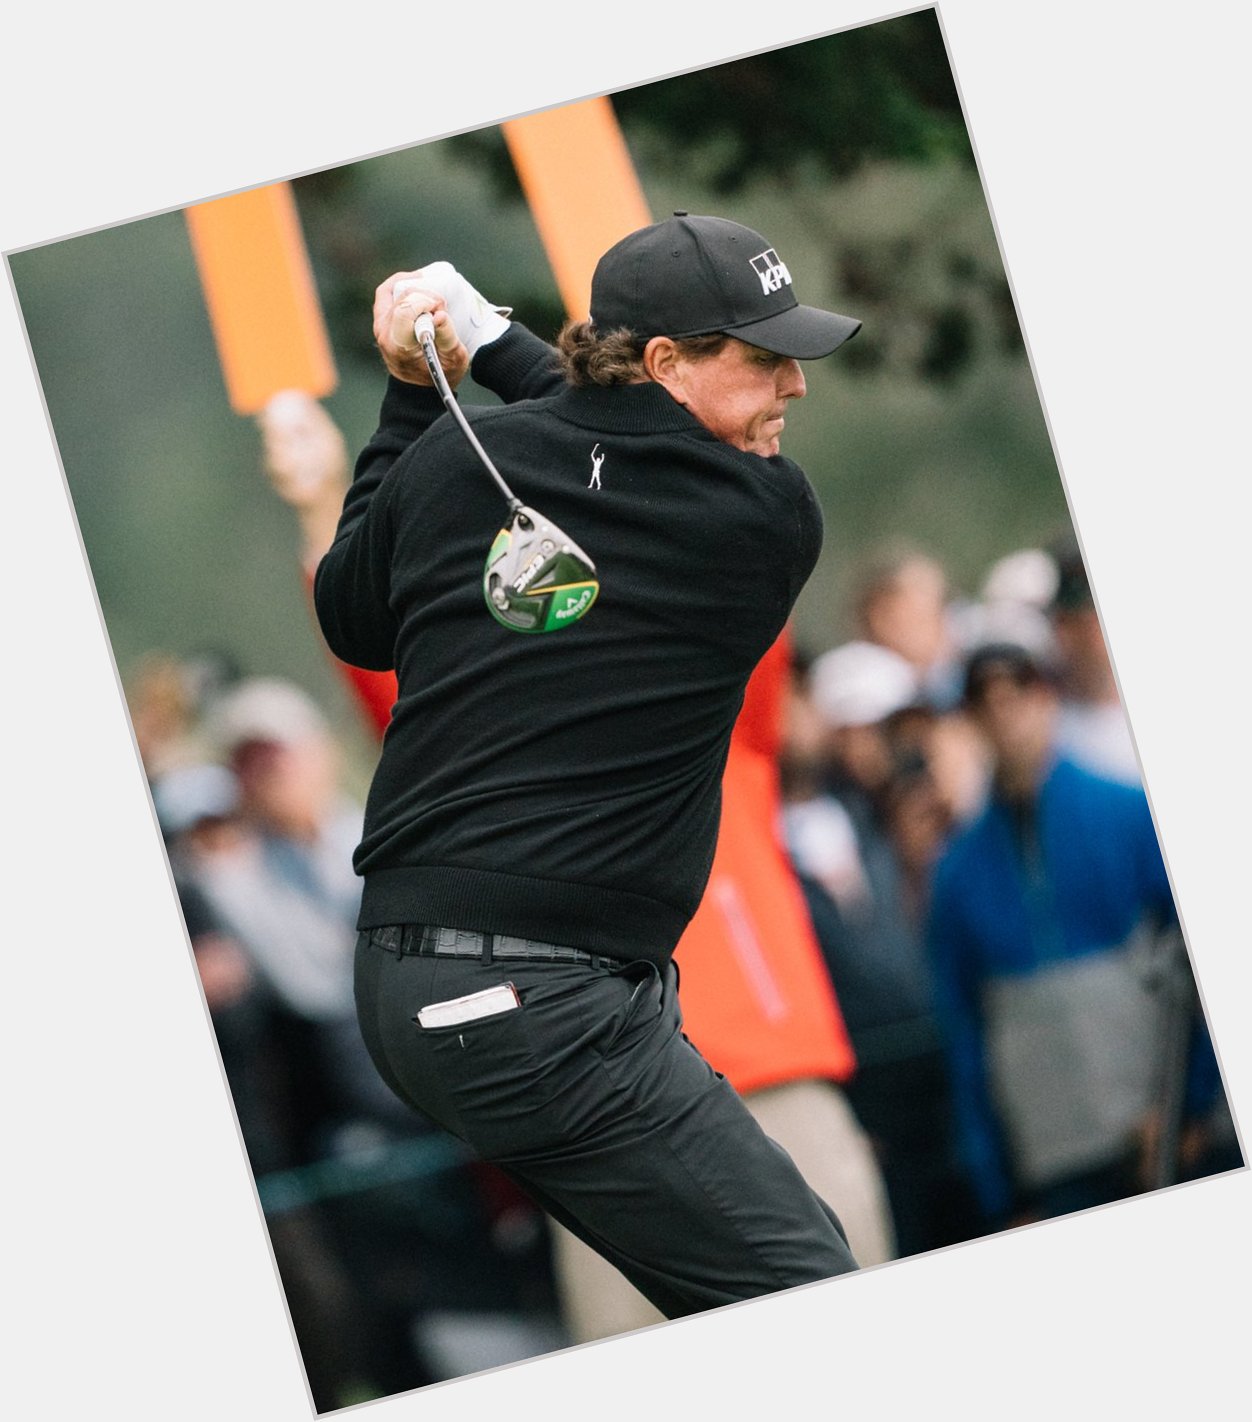 49 and still dropping bombs   REmessage and wish happy birthday to Phil Mickelson!  